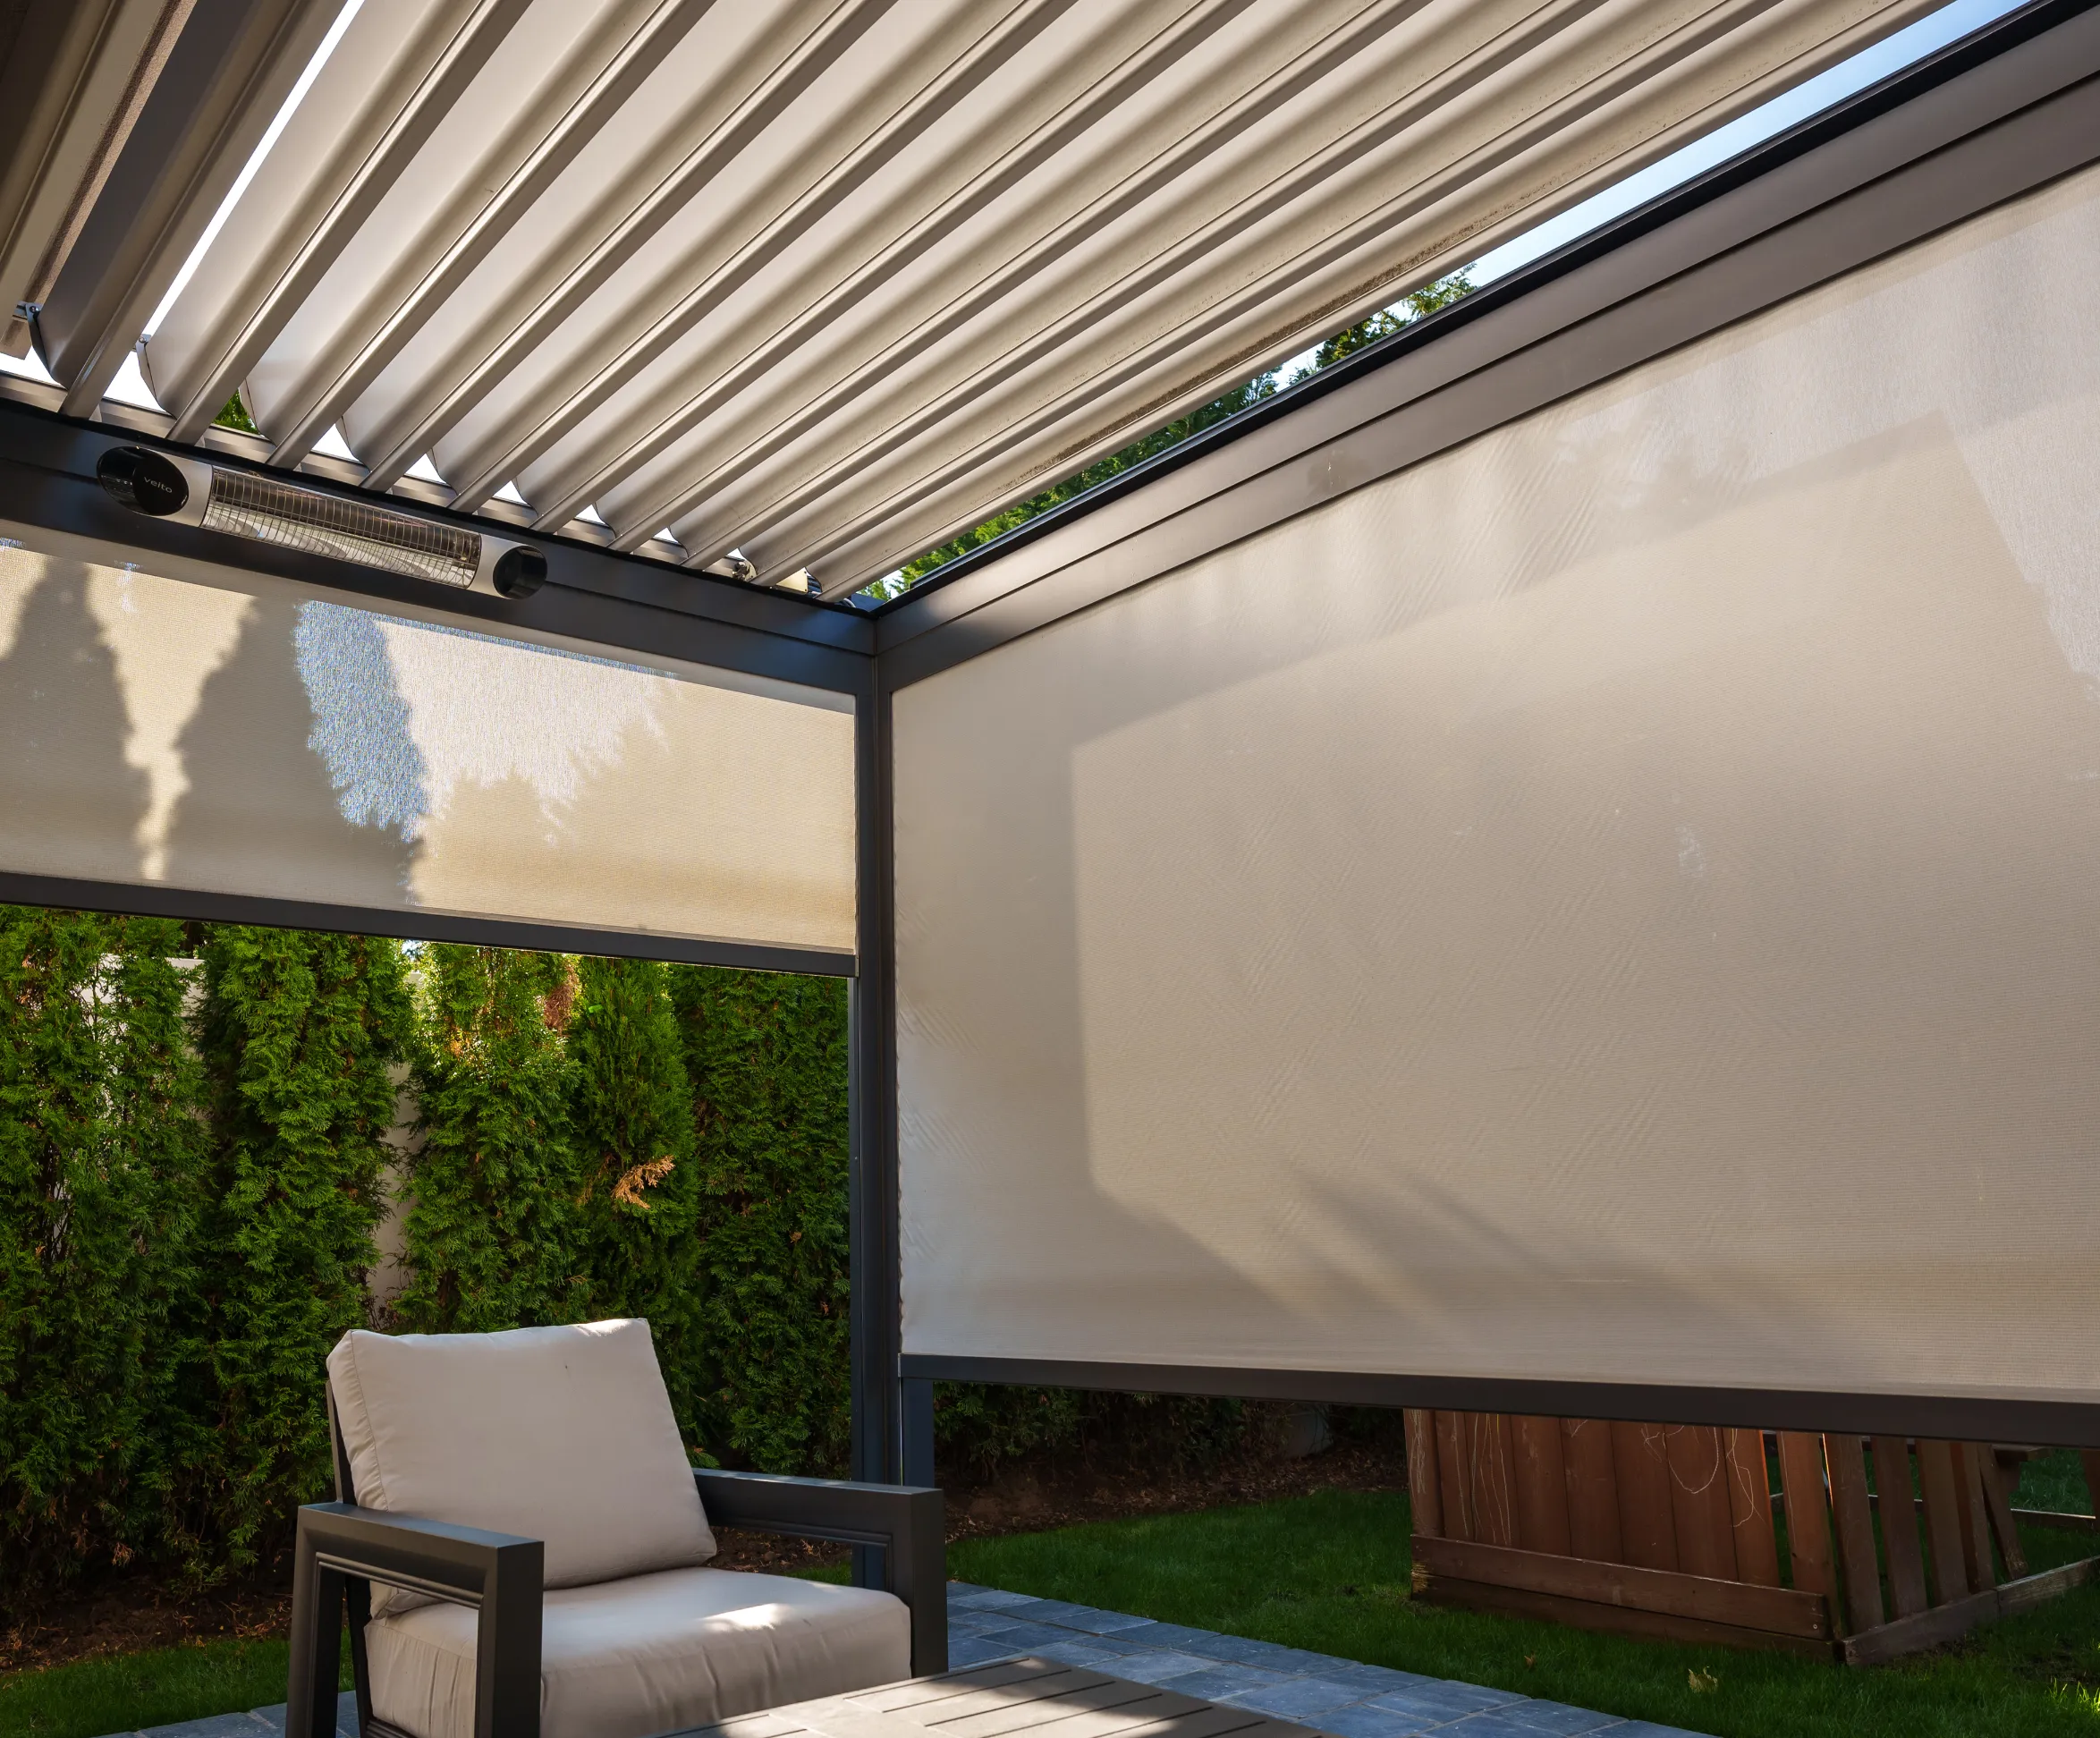 Featured image: A louvered pergola, designed to provide a refined outdoor space with adjustable shade and ventilation options - Read full post: Why Louvered Pergolas Are Ideal for Outdoor Entertaining?